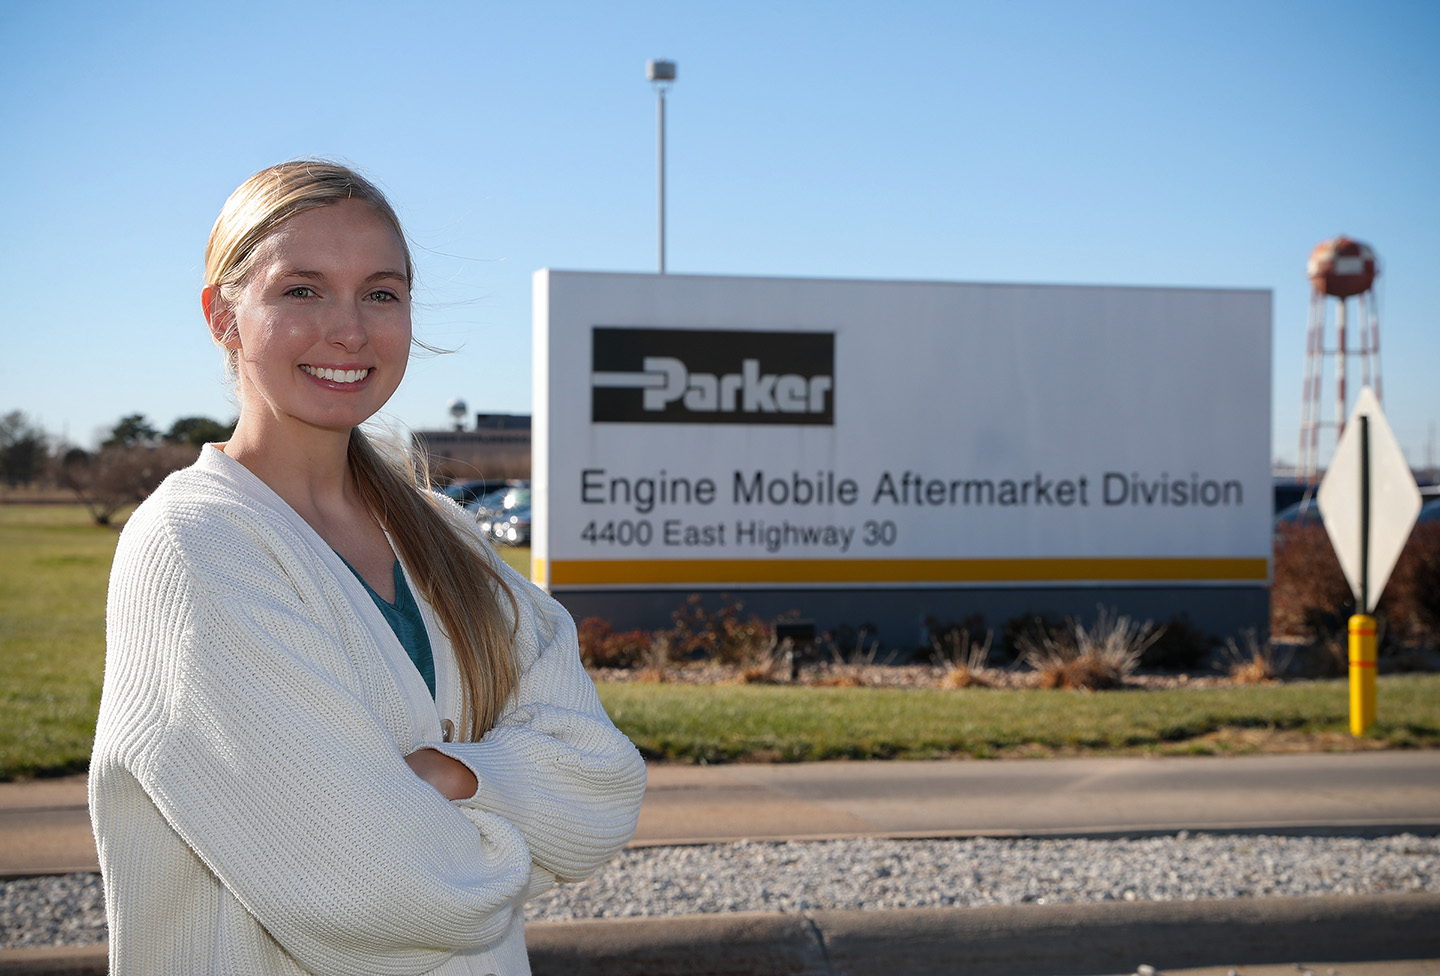 UNK graduate Autumn Graham works as a human resources specialist at Kearney-based Parker Hannifin. She connected with company representatives during campus events and was hired before completing her degree.